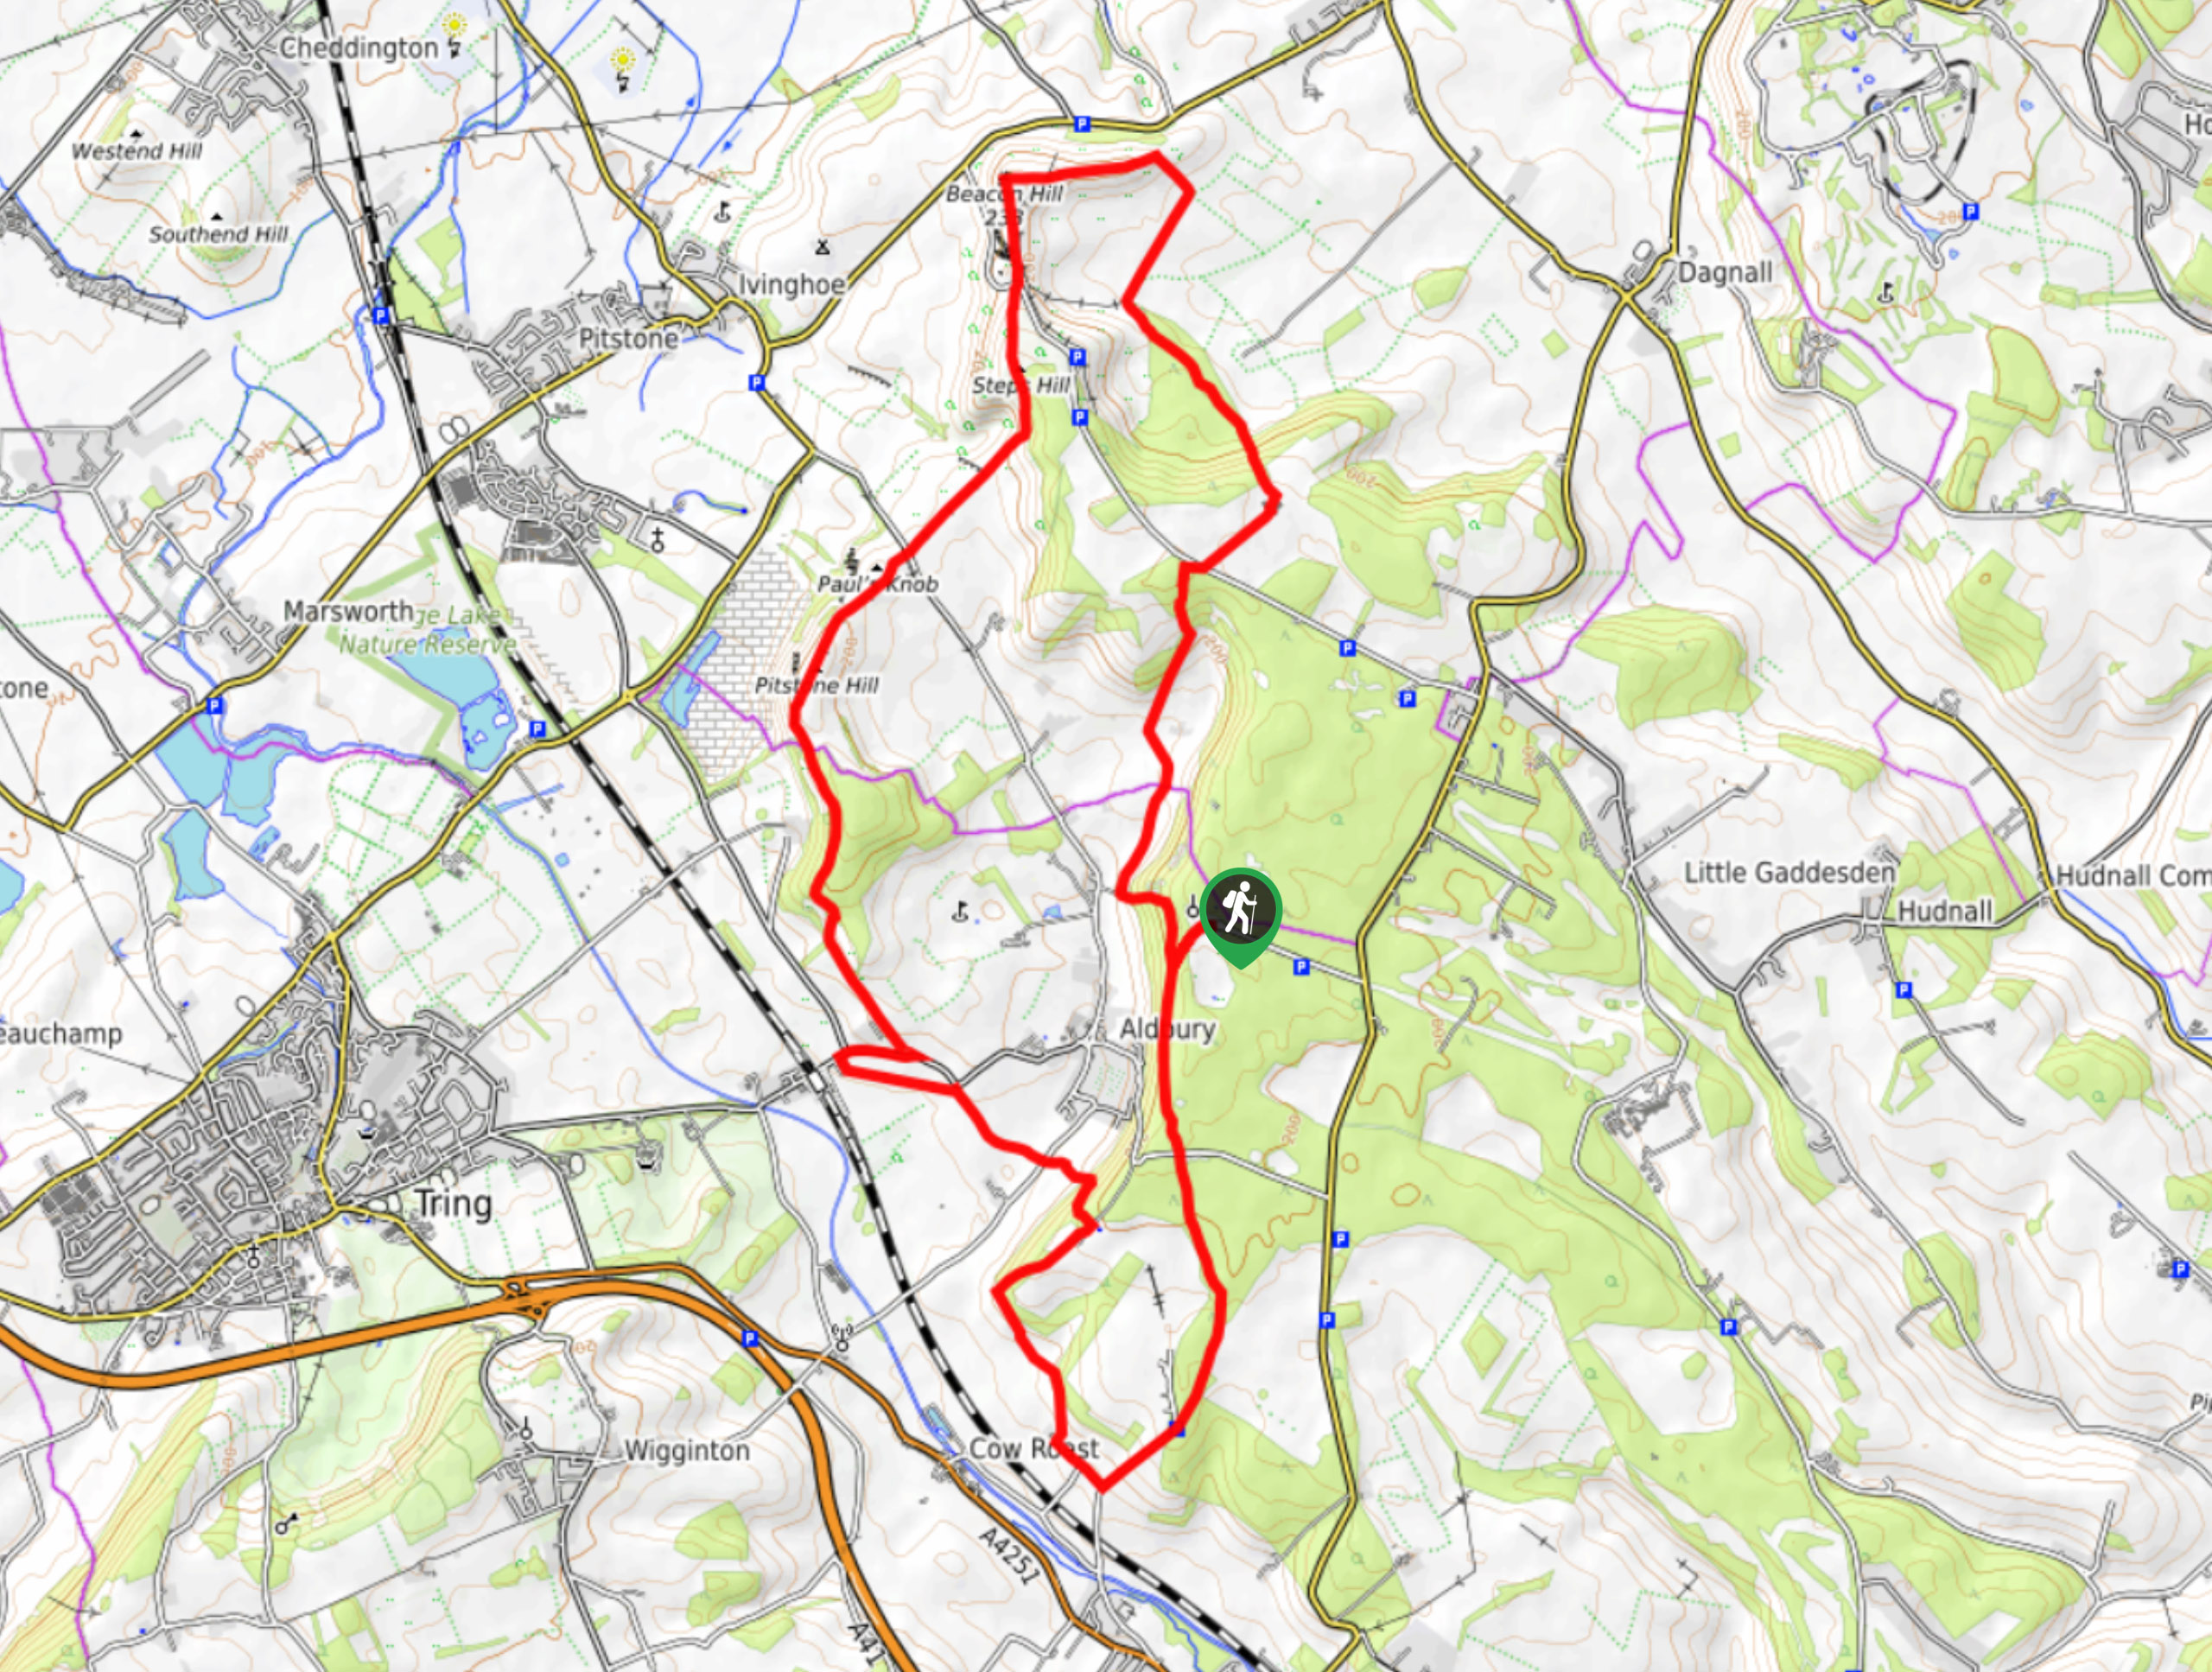 Clipper Down, Steps Hill, and Pittone Hill Loop Map